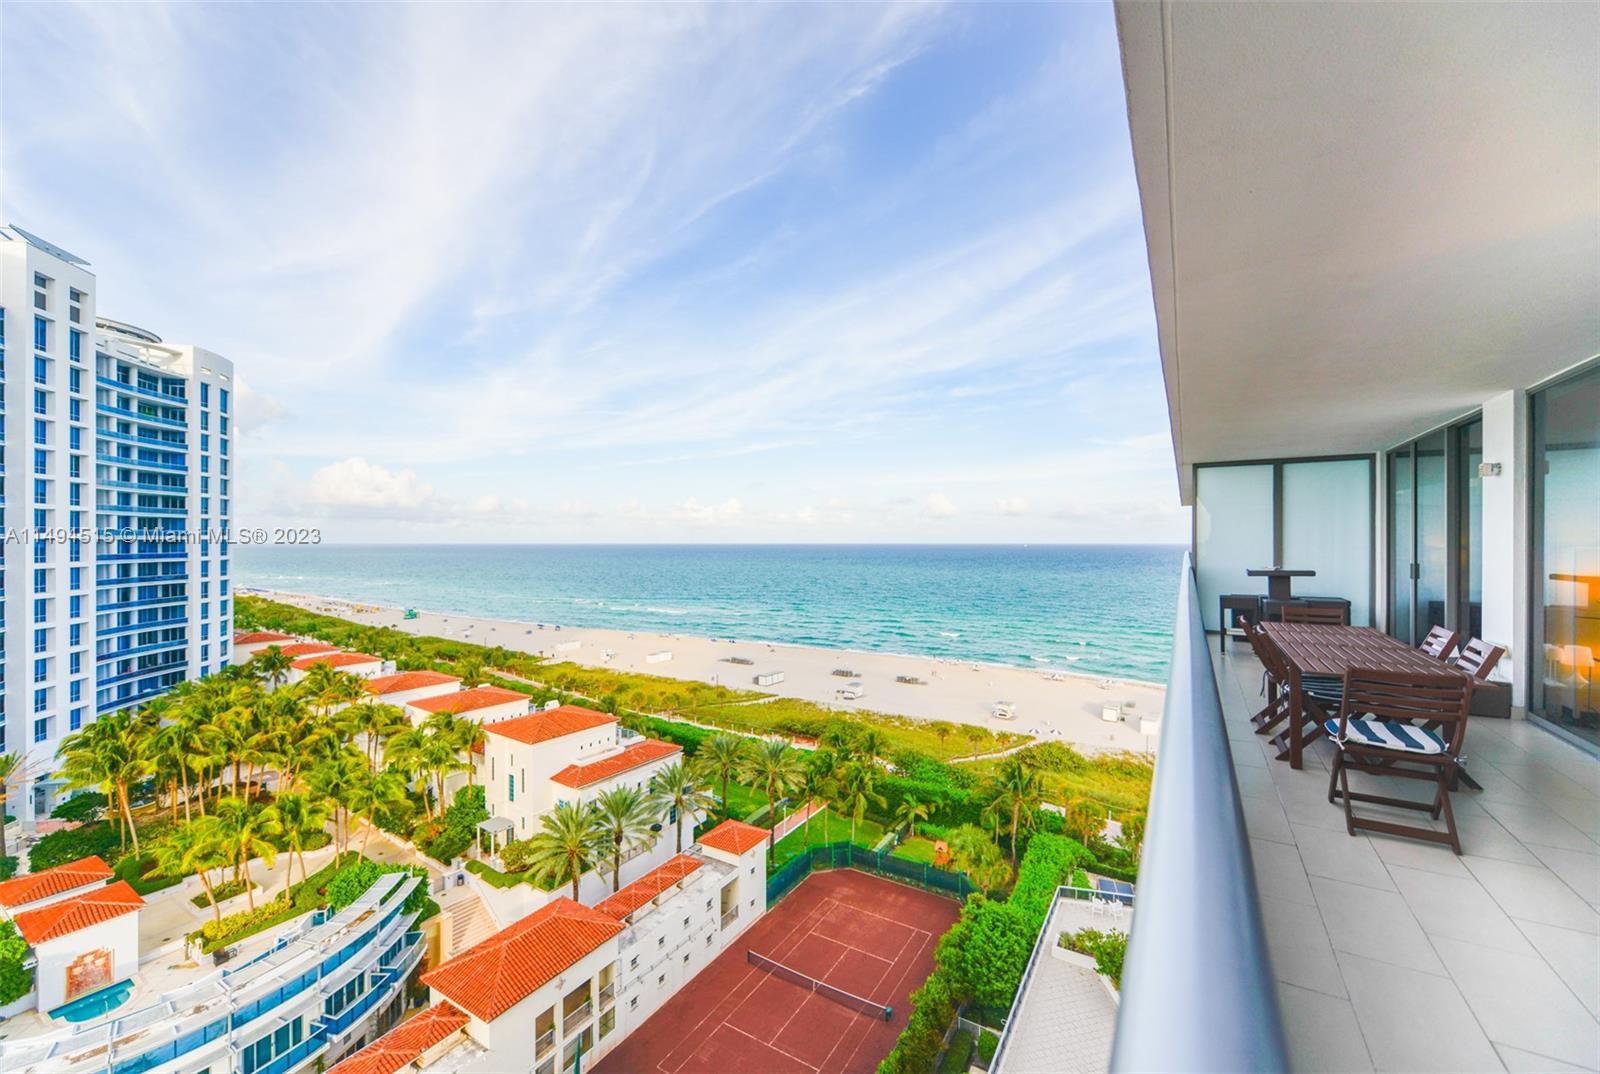 Rarely Available 2 Bed 2 ½  bath at the prestigious Mei Miami Beach with Ocean and Bay views. Originally furnished and designed by Famous Steven G Design House. The property has lots of Natural light from in every room with ocean views. Boutique building with all the modern amenities including pool and beach services, social rooms, library, gym, spa 24/7 front desk with Security and valet. Enjoy the full service building and amenities. See for yourself.